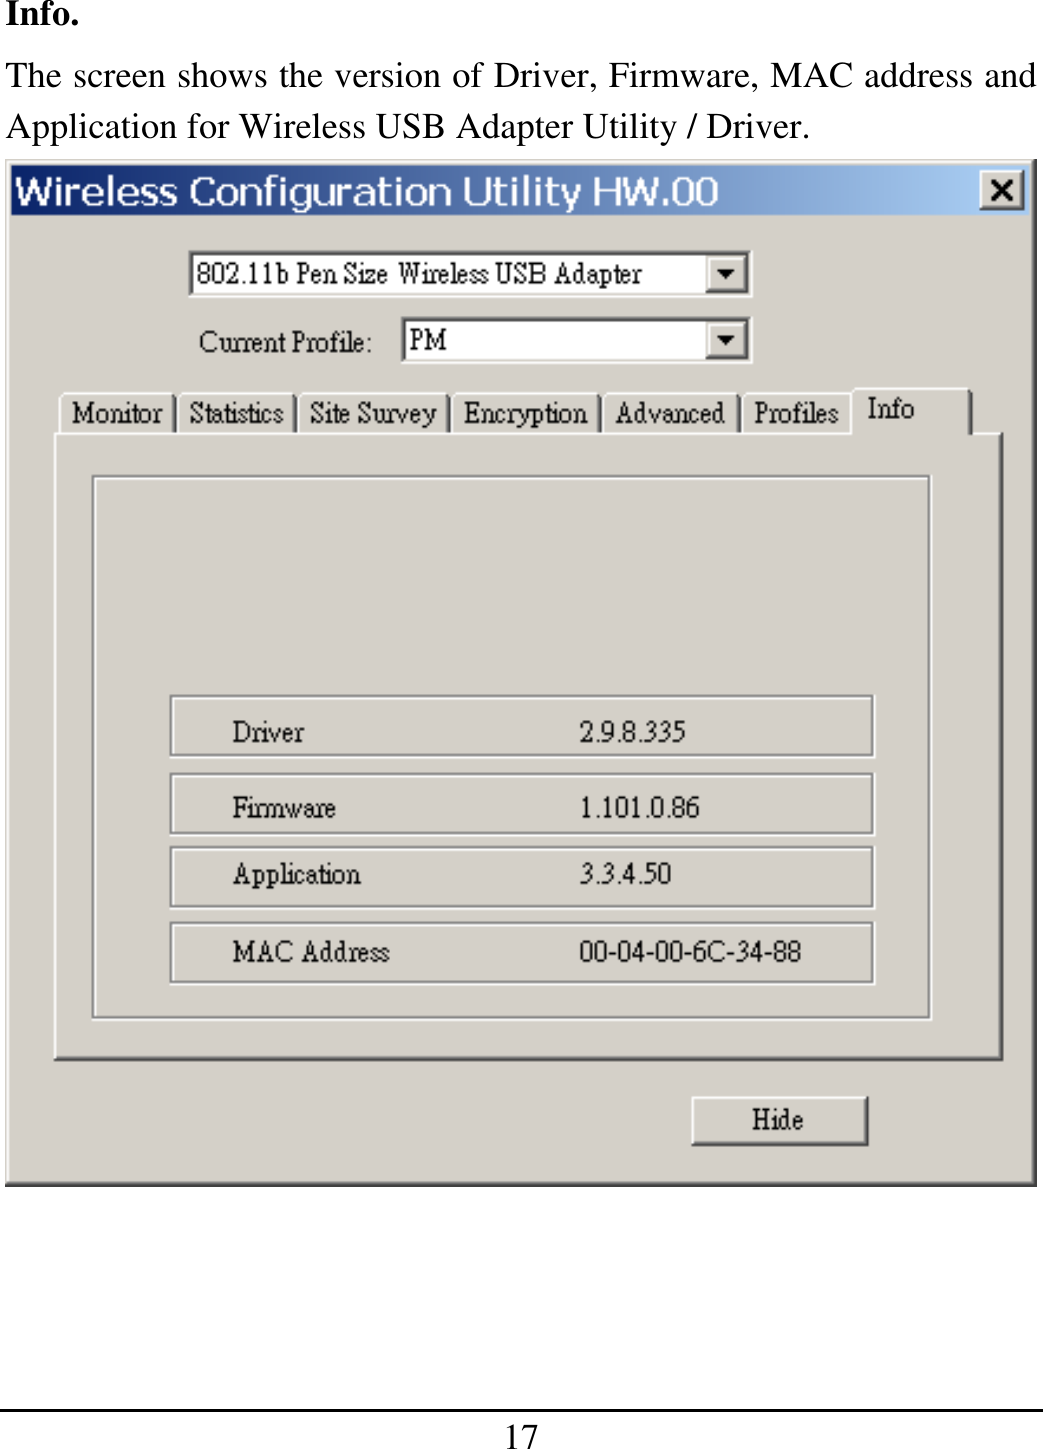 17 Info. The screen shows the version of Driver, Firmware, MAC address and Application for Wireless USB Adapter Utility / Driver. 